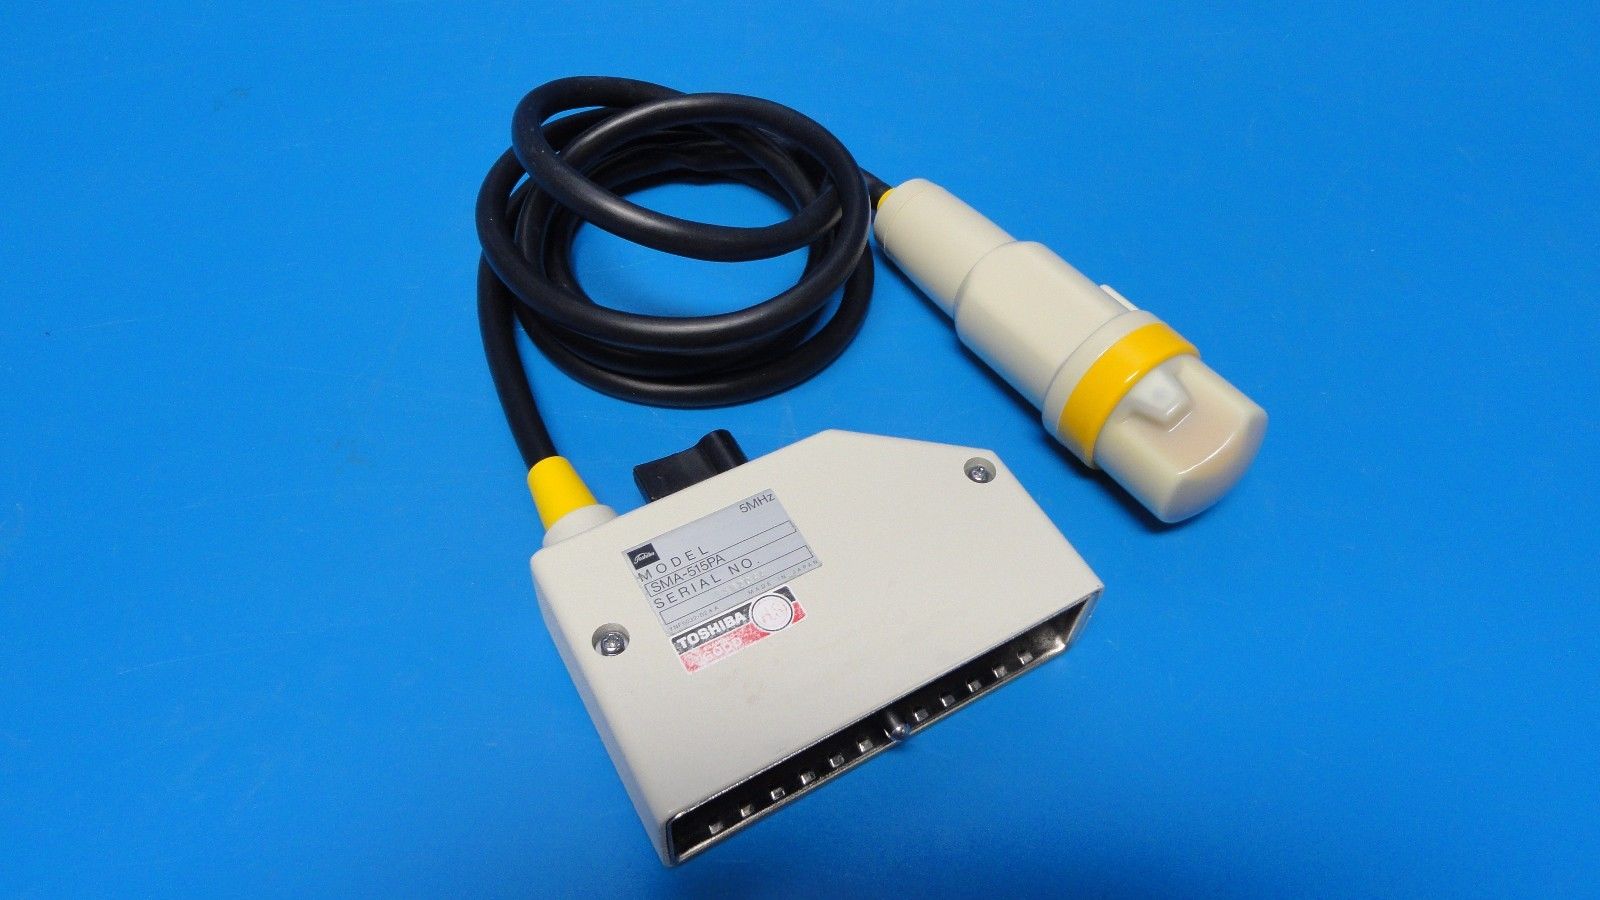 TOSHIBA SMA-515PA 5.0 MHZ ANNULAR ARRAY / PHASED ARRAY PROBE / TRANSDUCER (7084) DIAGNOSTIC ULTRASOUND MACHINES FOR SALE